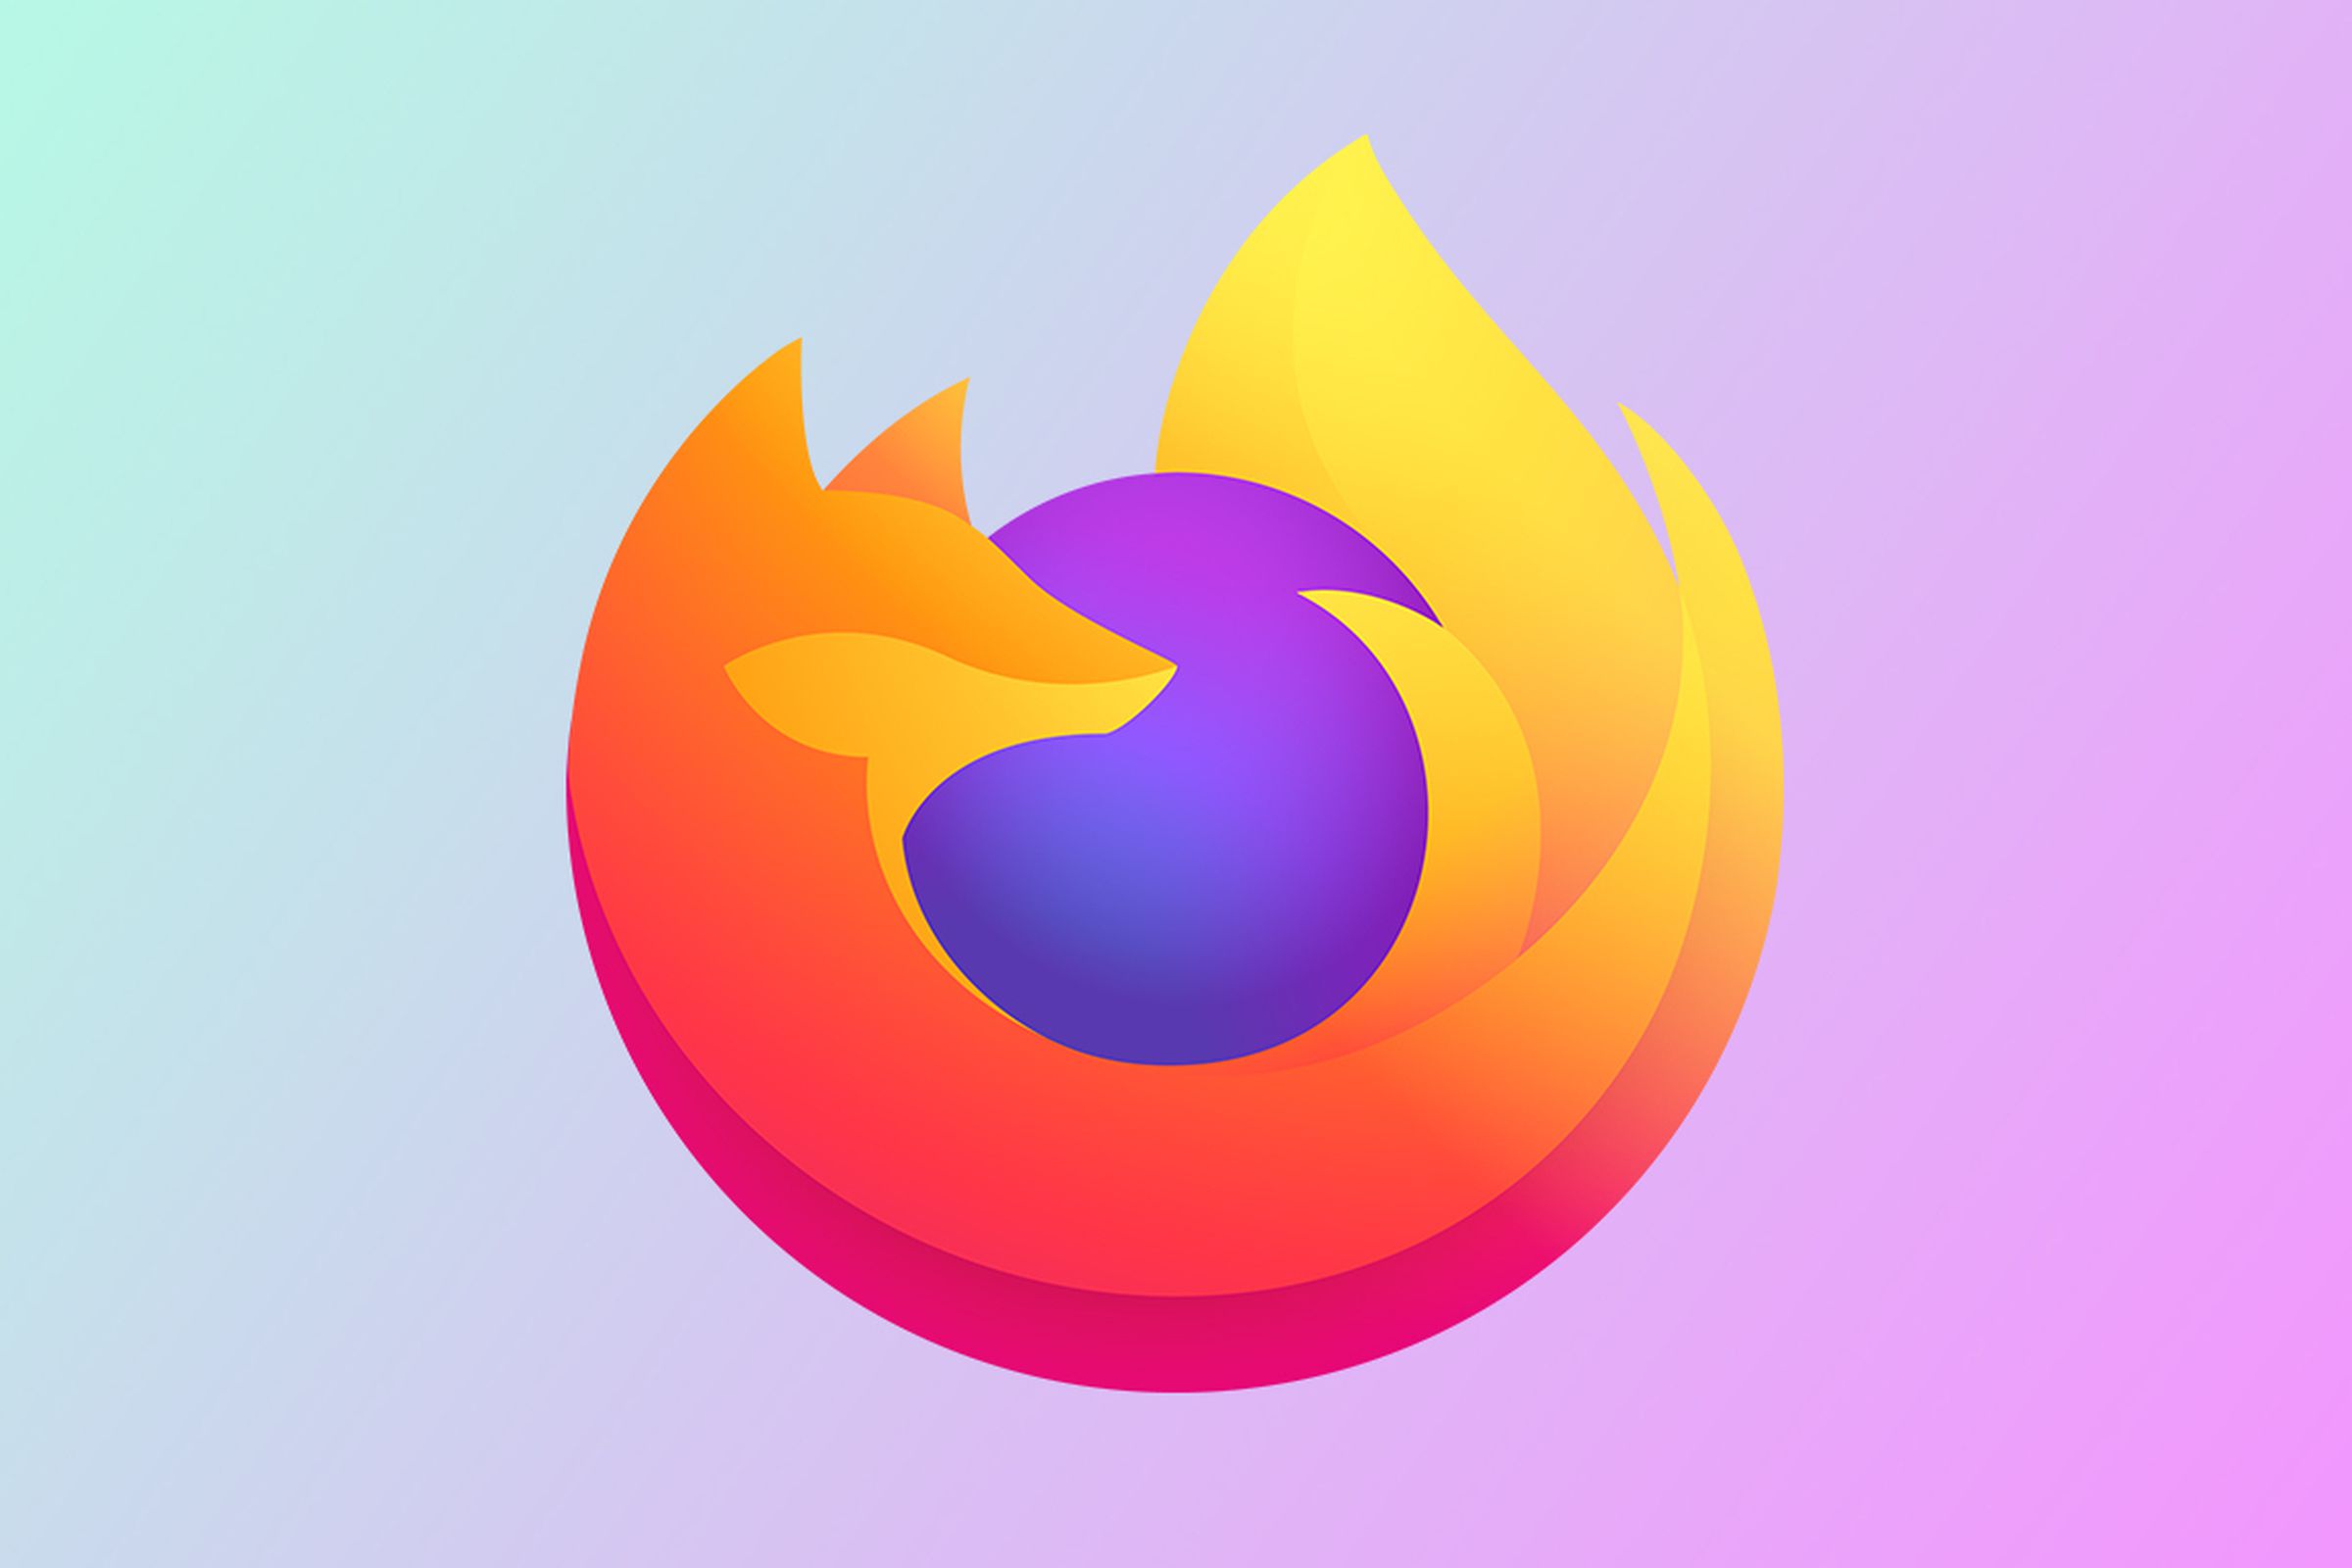 An image showing the Firefox logo on a gradient background